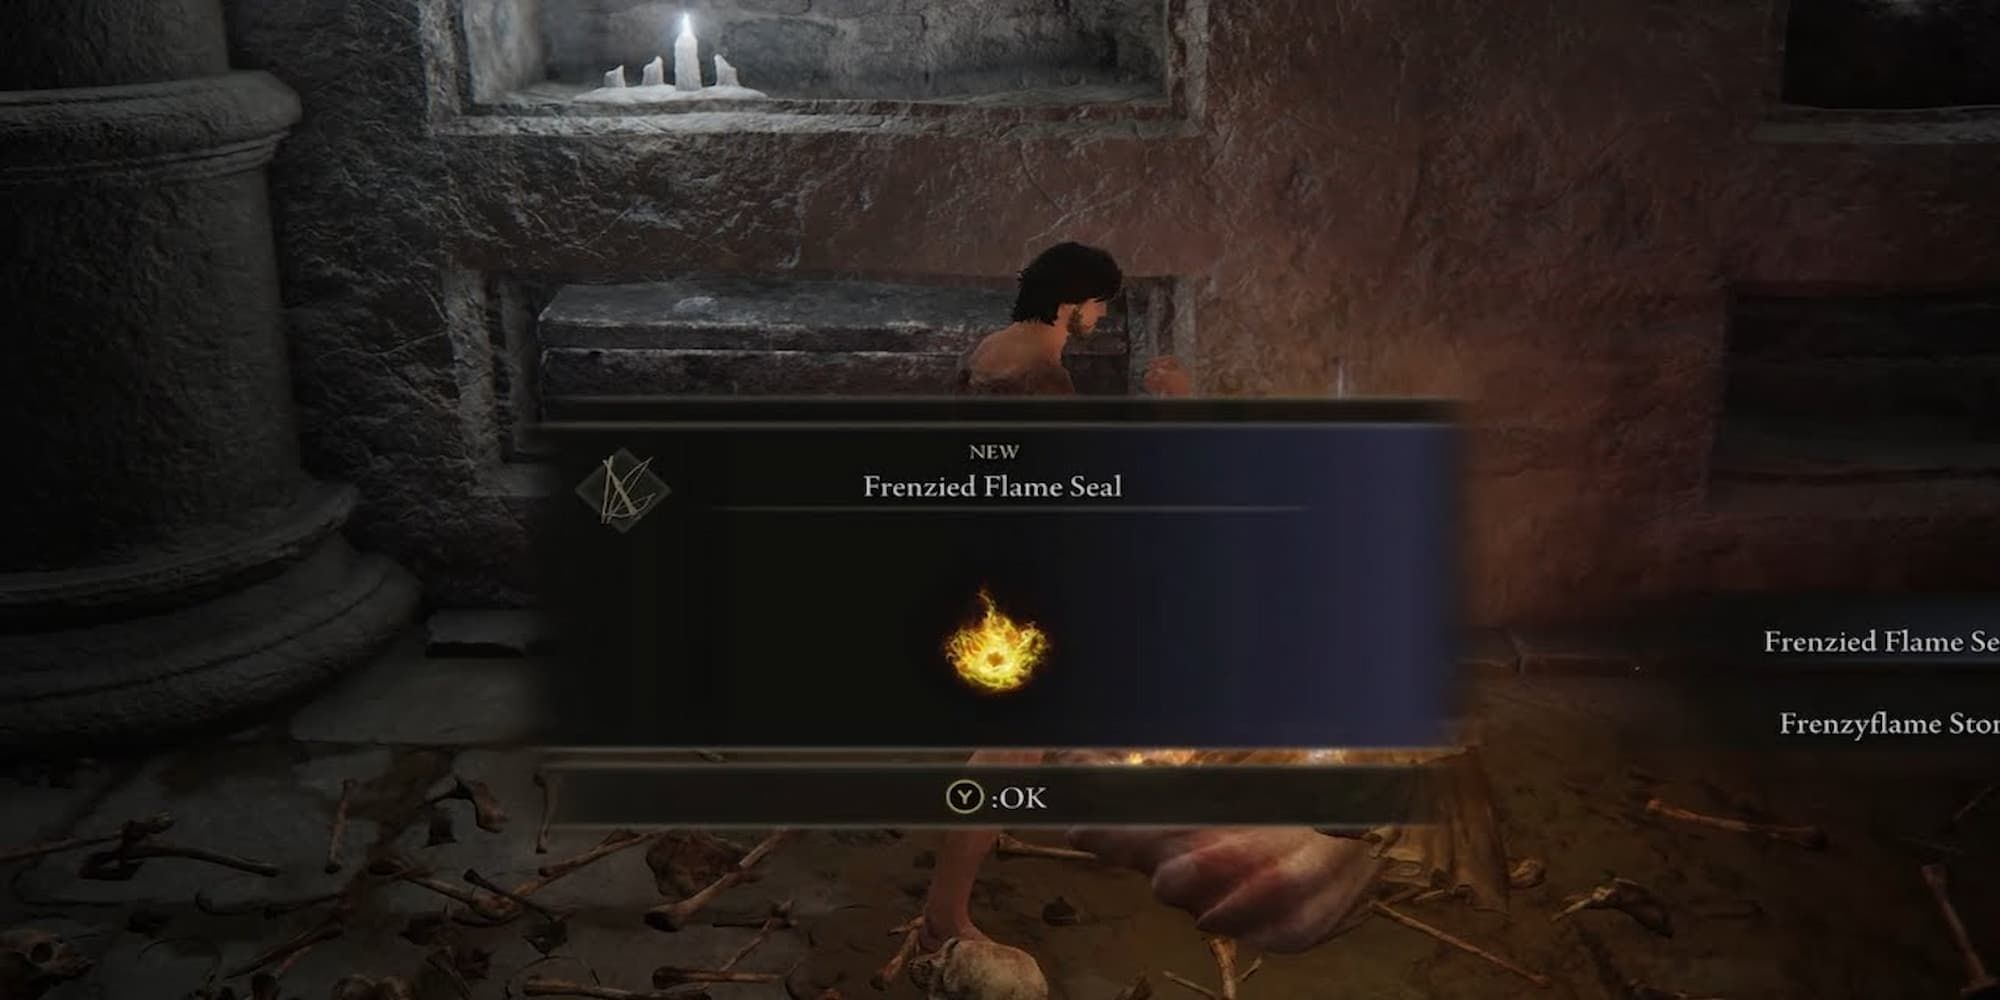 Player Obtaining The Frenzied Flame Seal